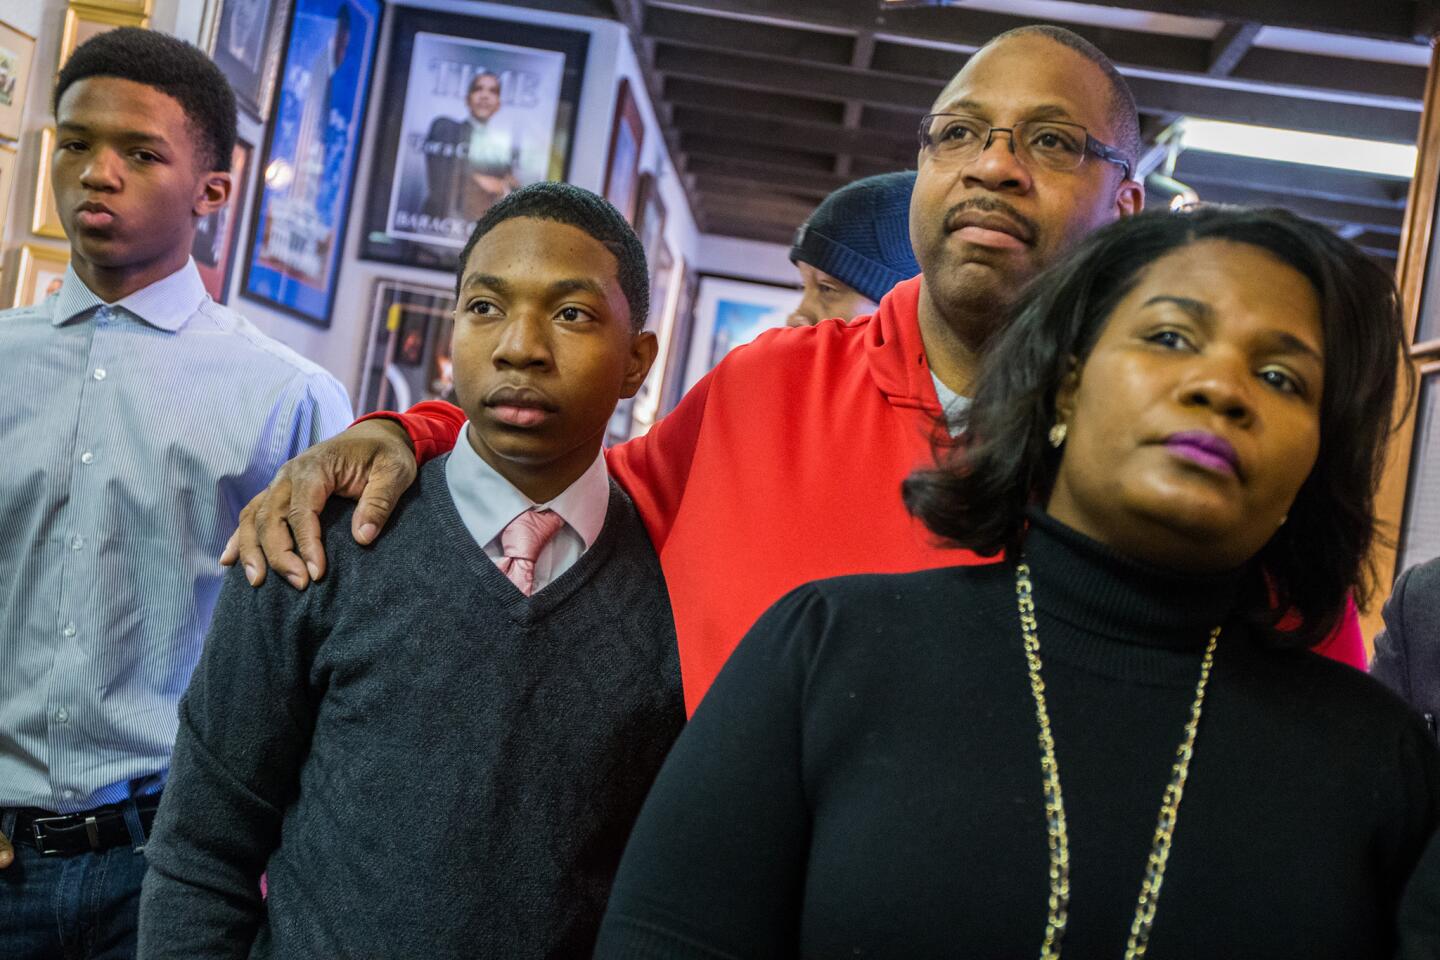 Former players Lawrence Noble, 14, left, Brandon Green, 14, and his parents, Christopher and Venisa Green, listen as attorney James A. Karamanis talks about a lawsuit on behalf of parents and former Little League baseball players from the Jackie Robinson West team in Chicago on Feb. 15, 2016. The Jackie Robinson West youth baseball team was stripped of the 2014 U.S. Little League championship title.